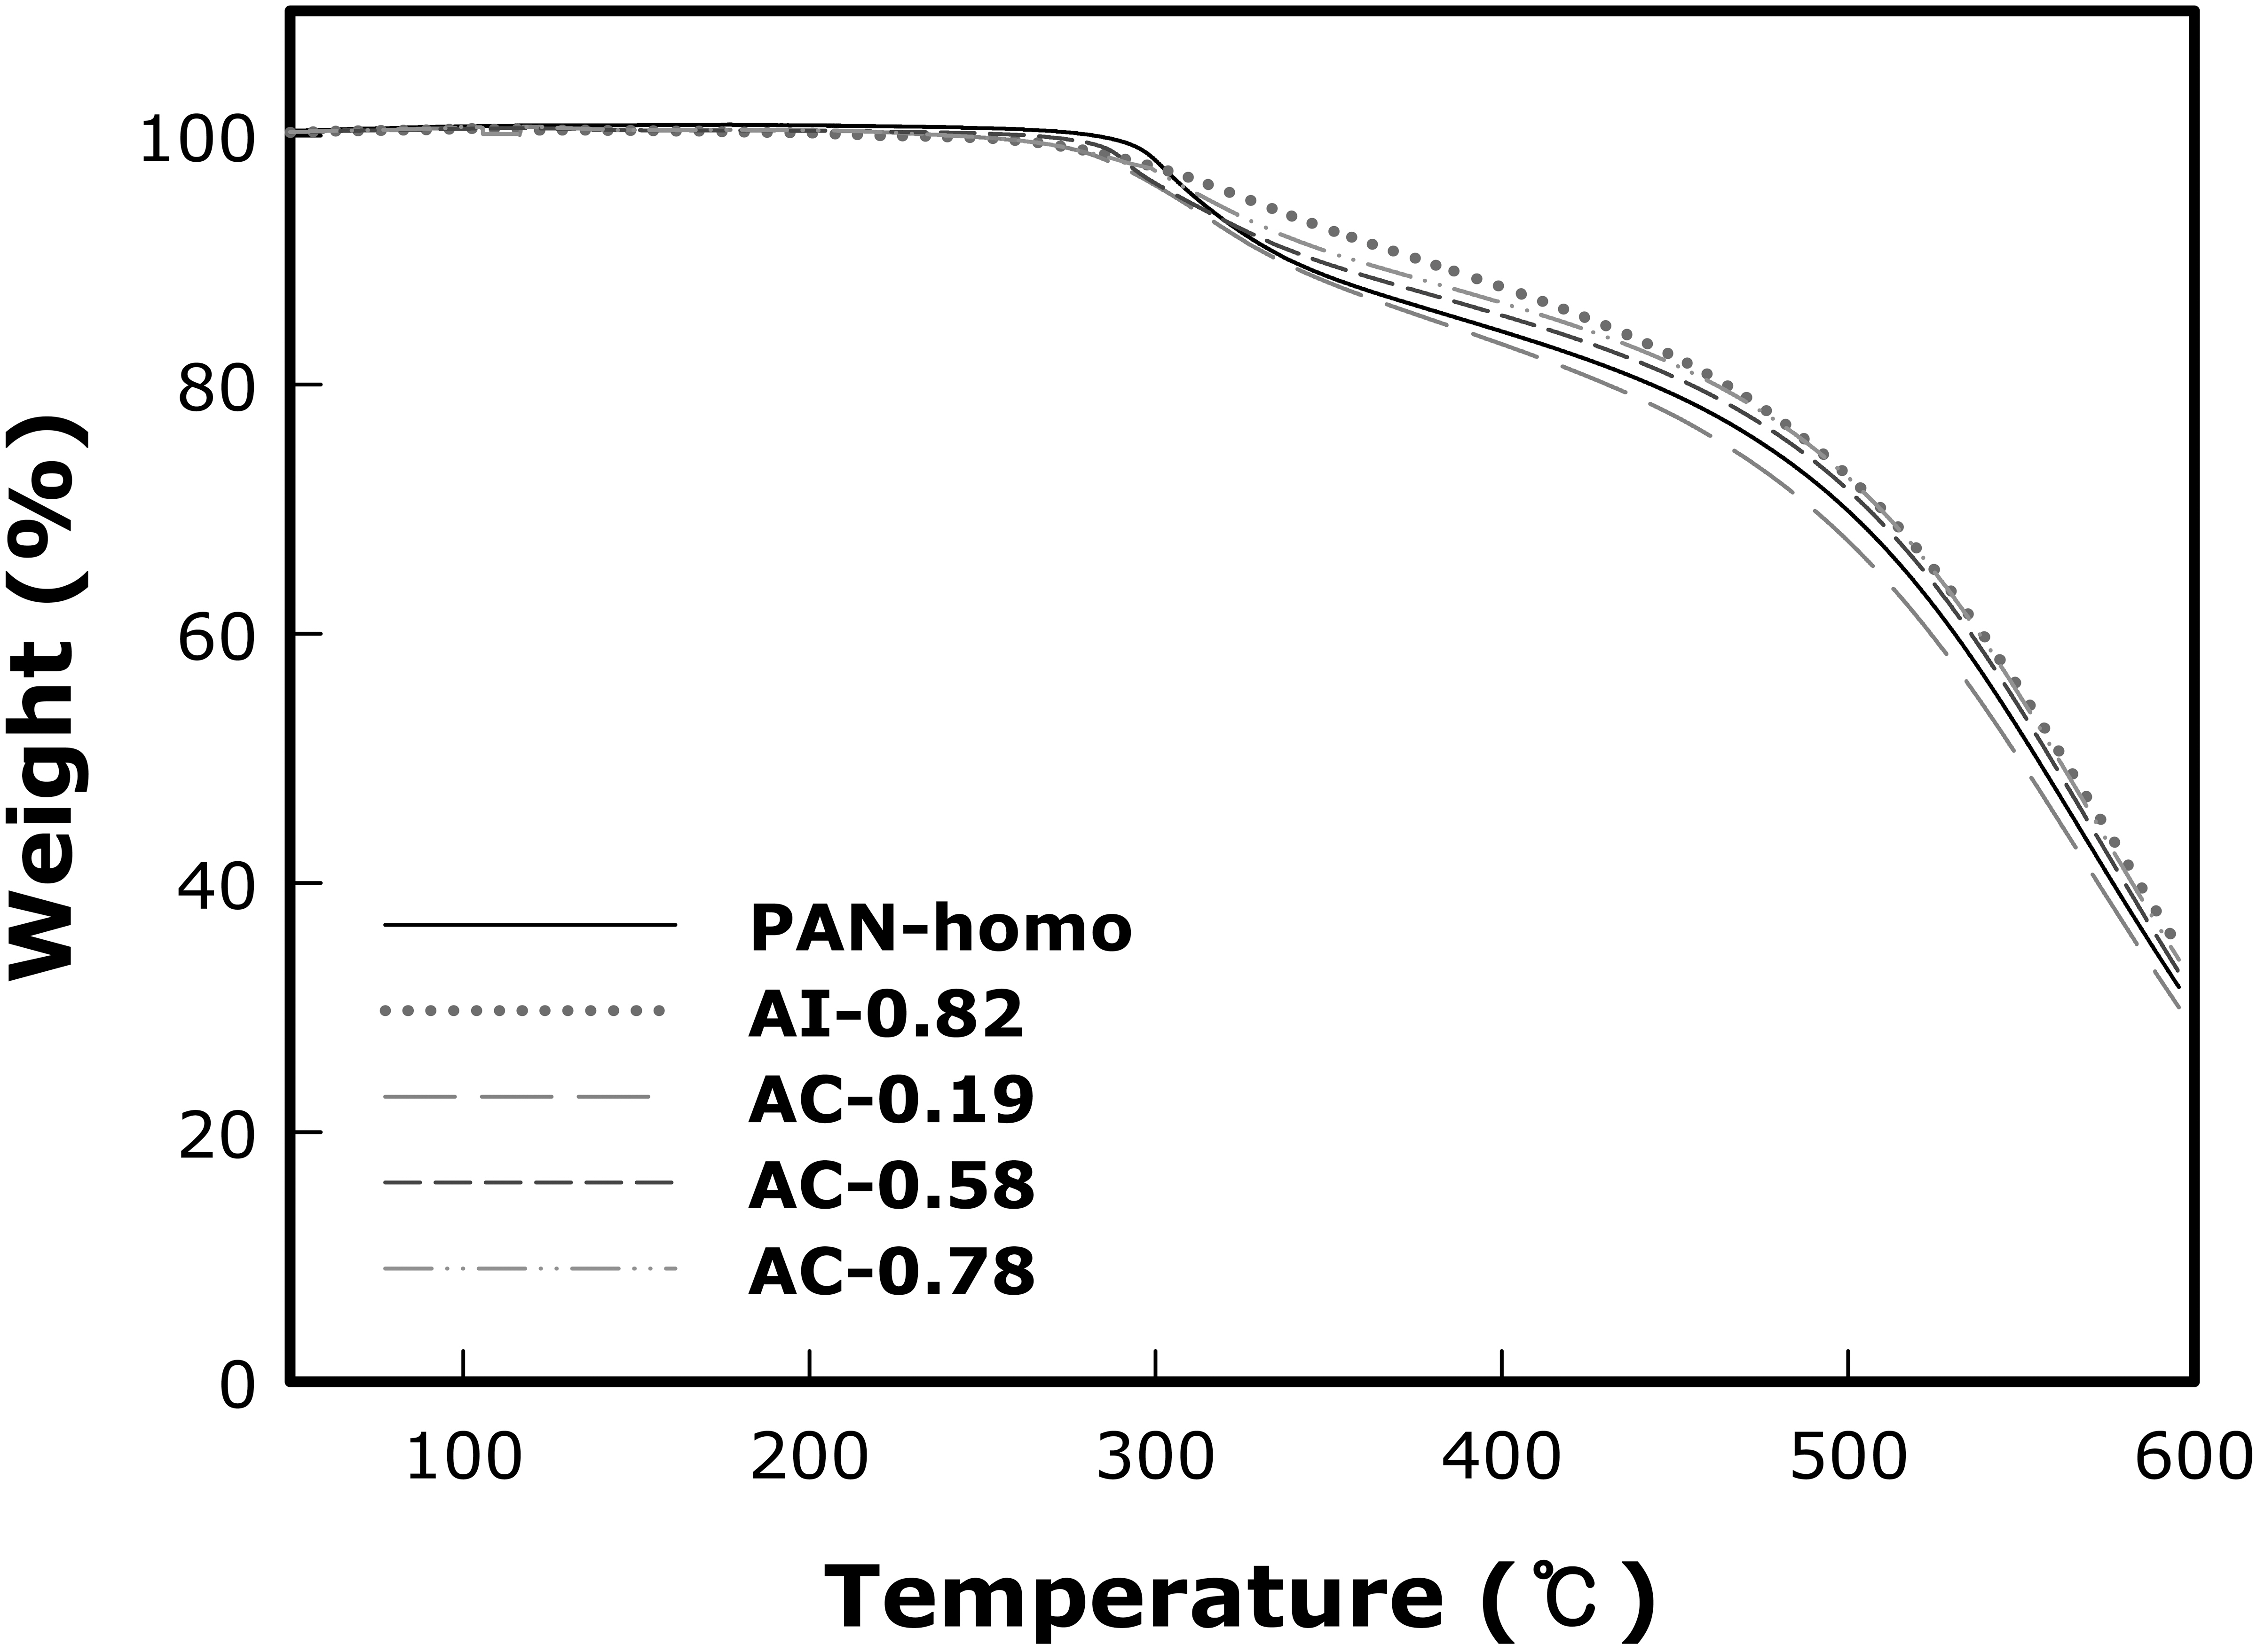 Thermogravimetric analysis curves of polyacrylonitrile(PAN) precursors in air atmosphere at a heating rate of 10oC/min.